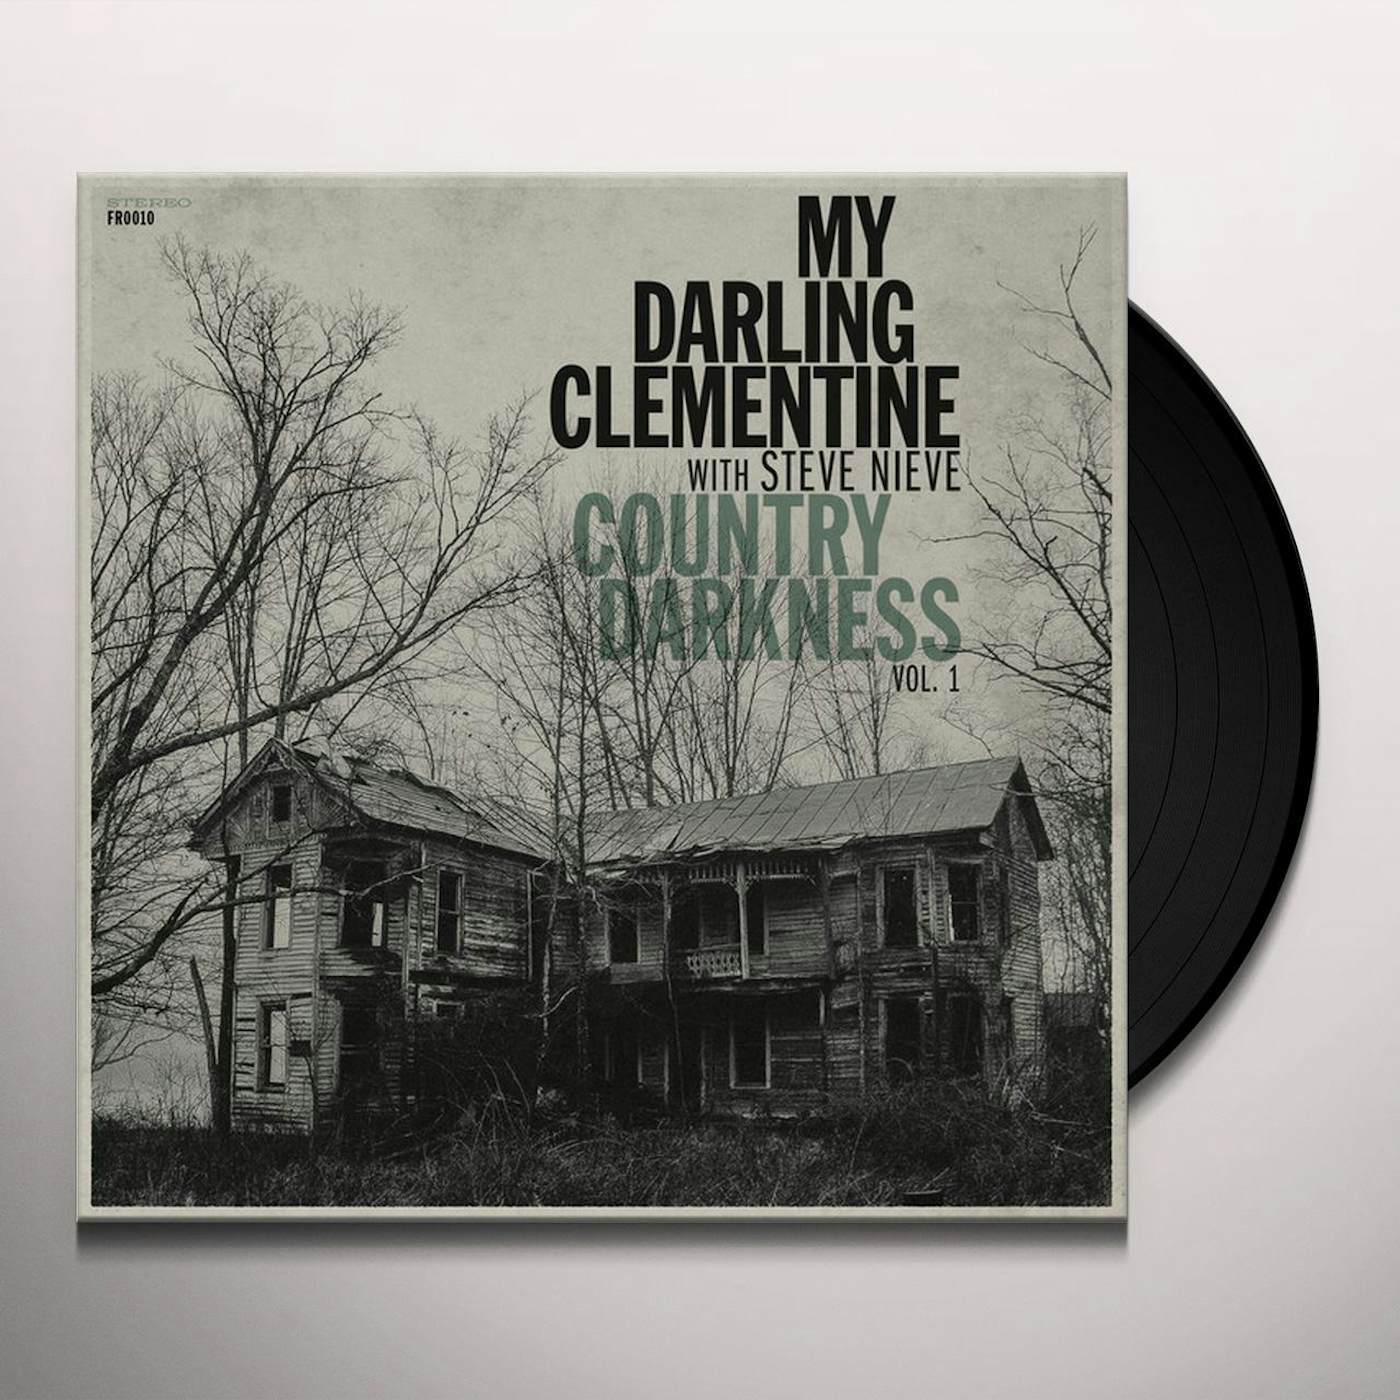 My Darling Clementine COUNTRY DARKNESS VOL 1 Vinyl Record